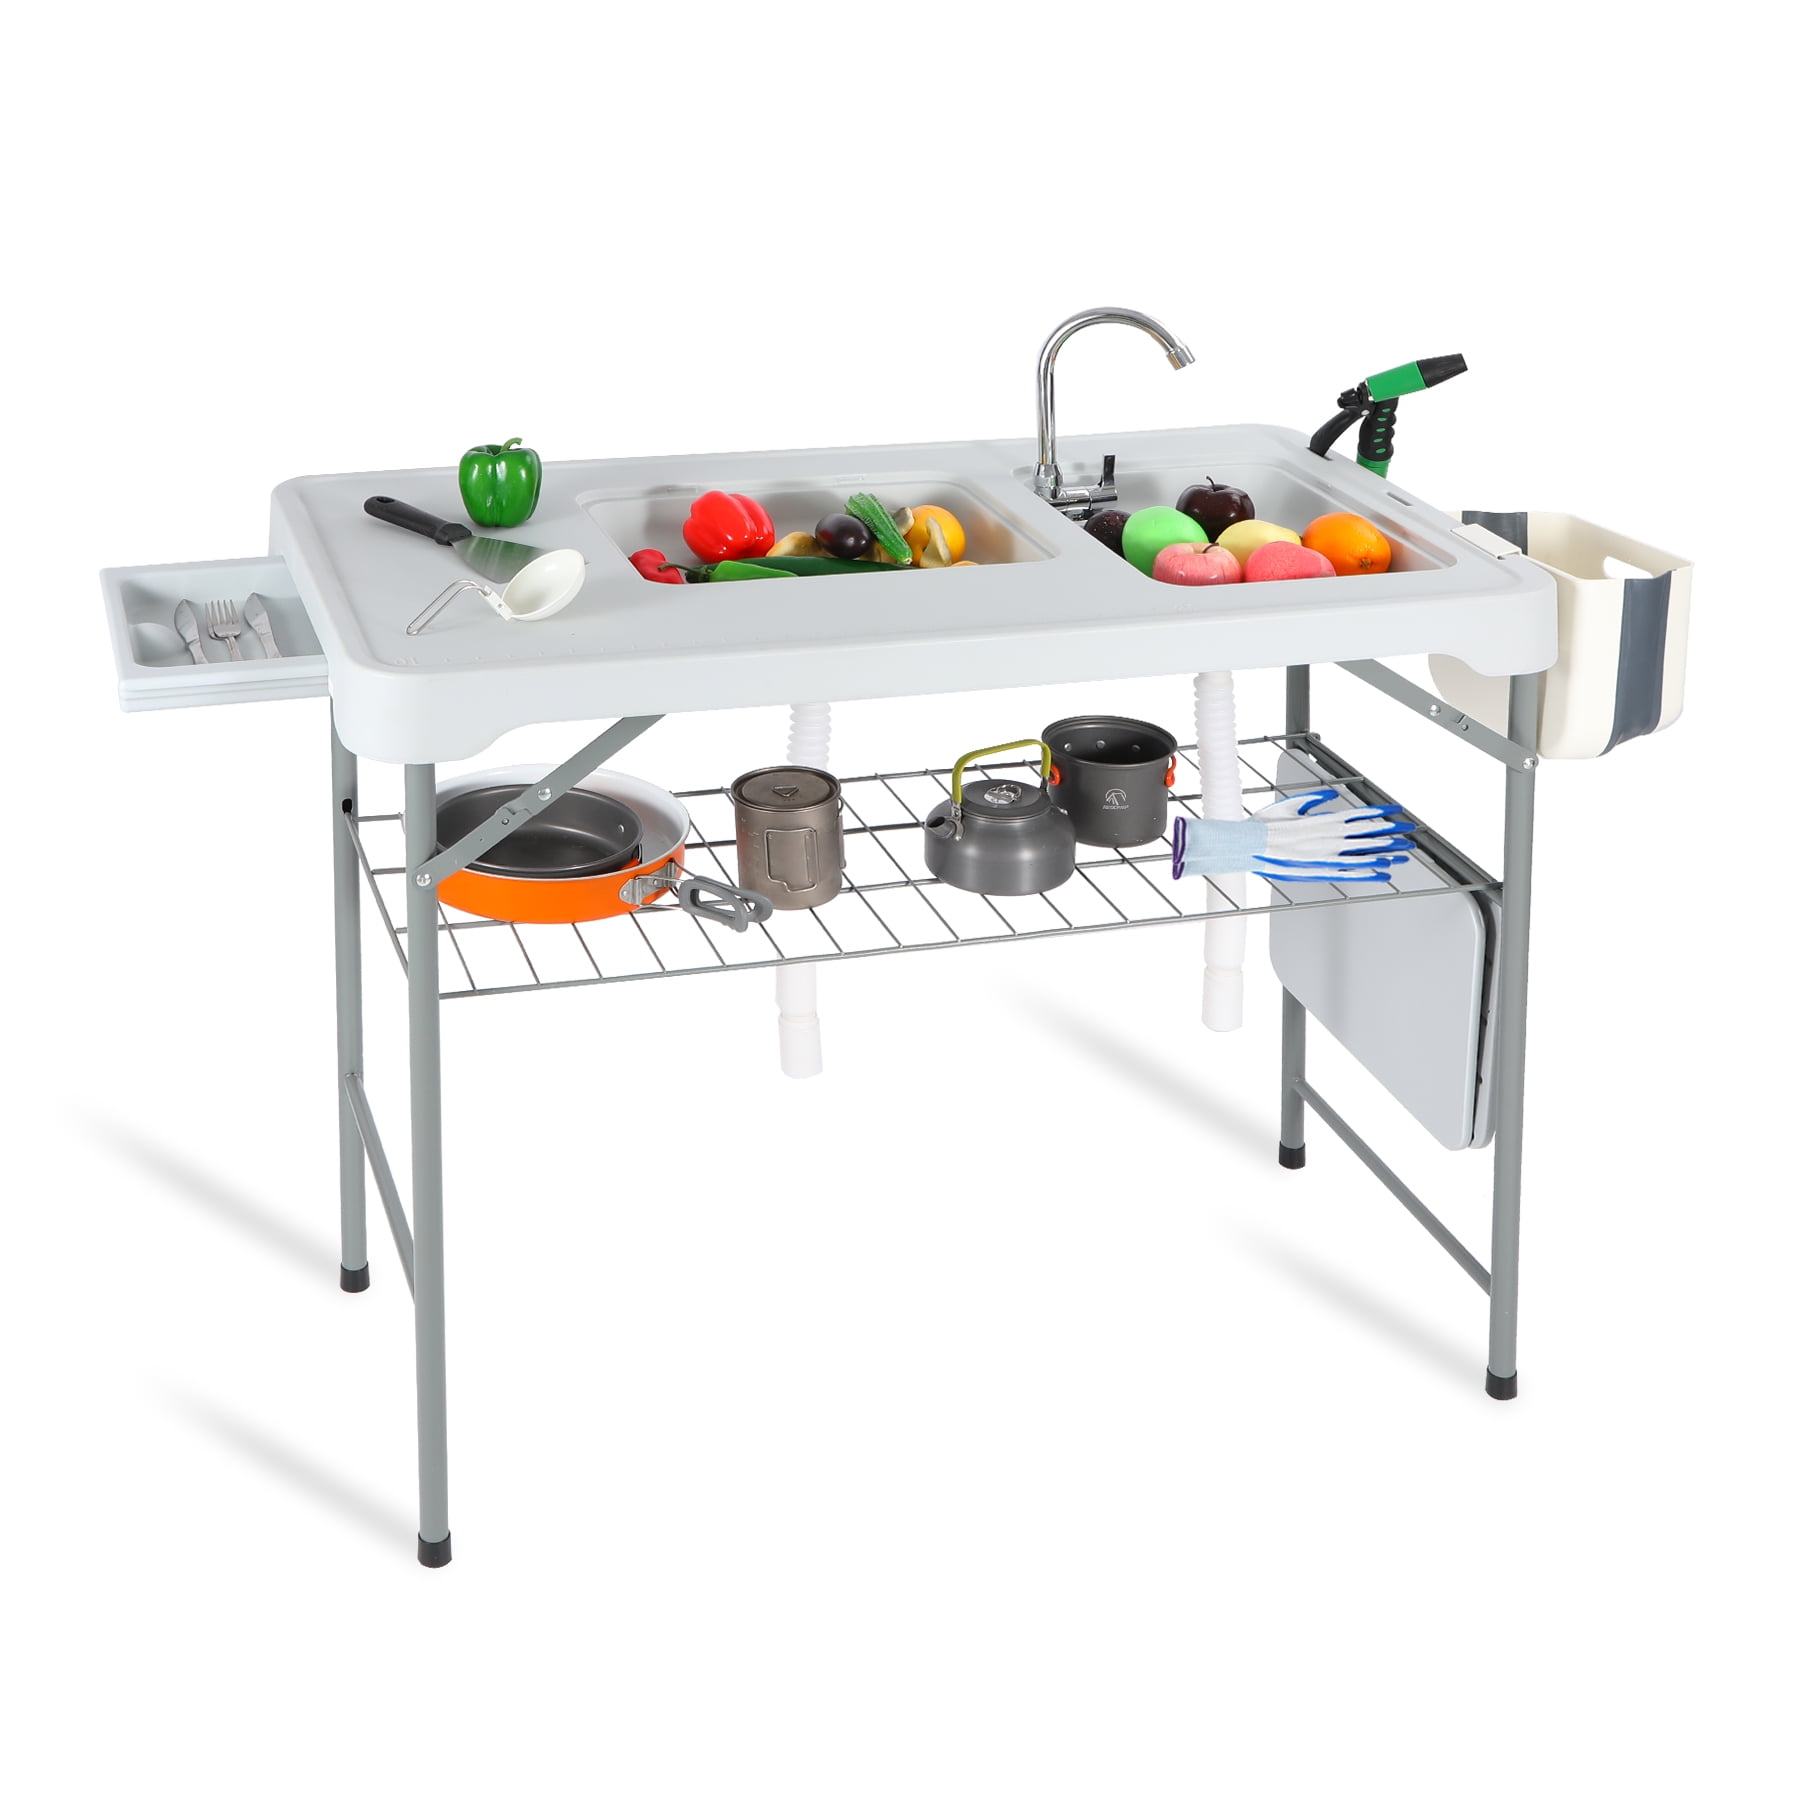 REDCAMP Folding Fish Cleaning Table with 2 Sinks and Sprayer